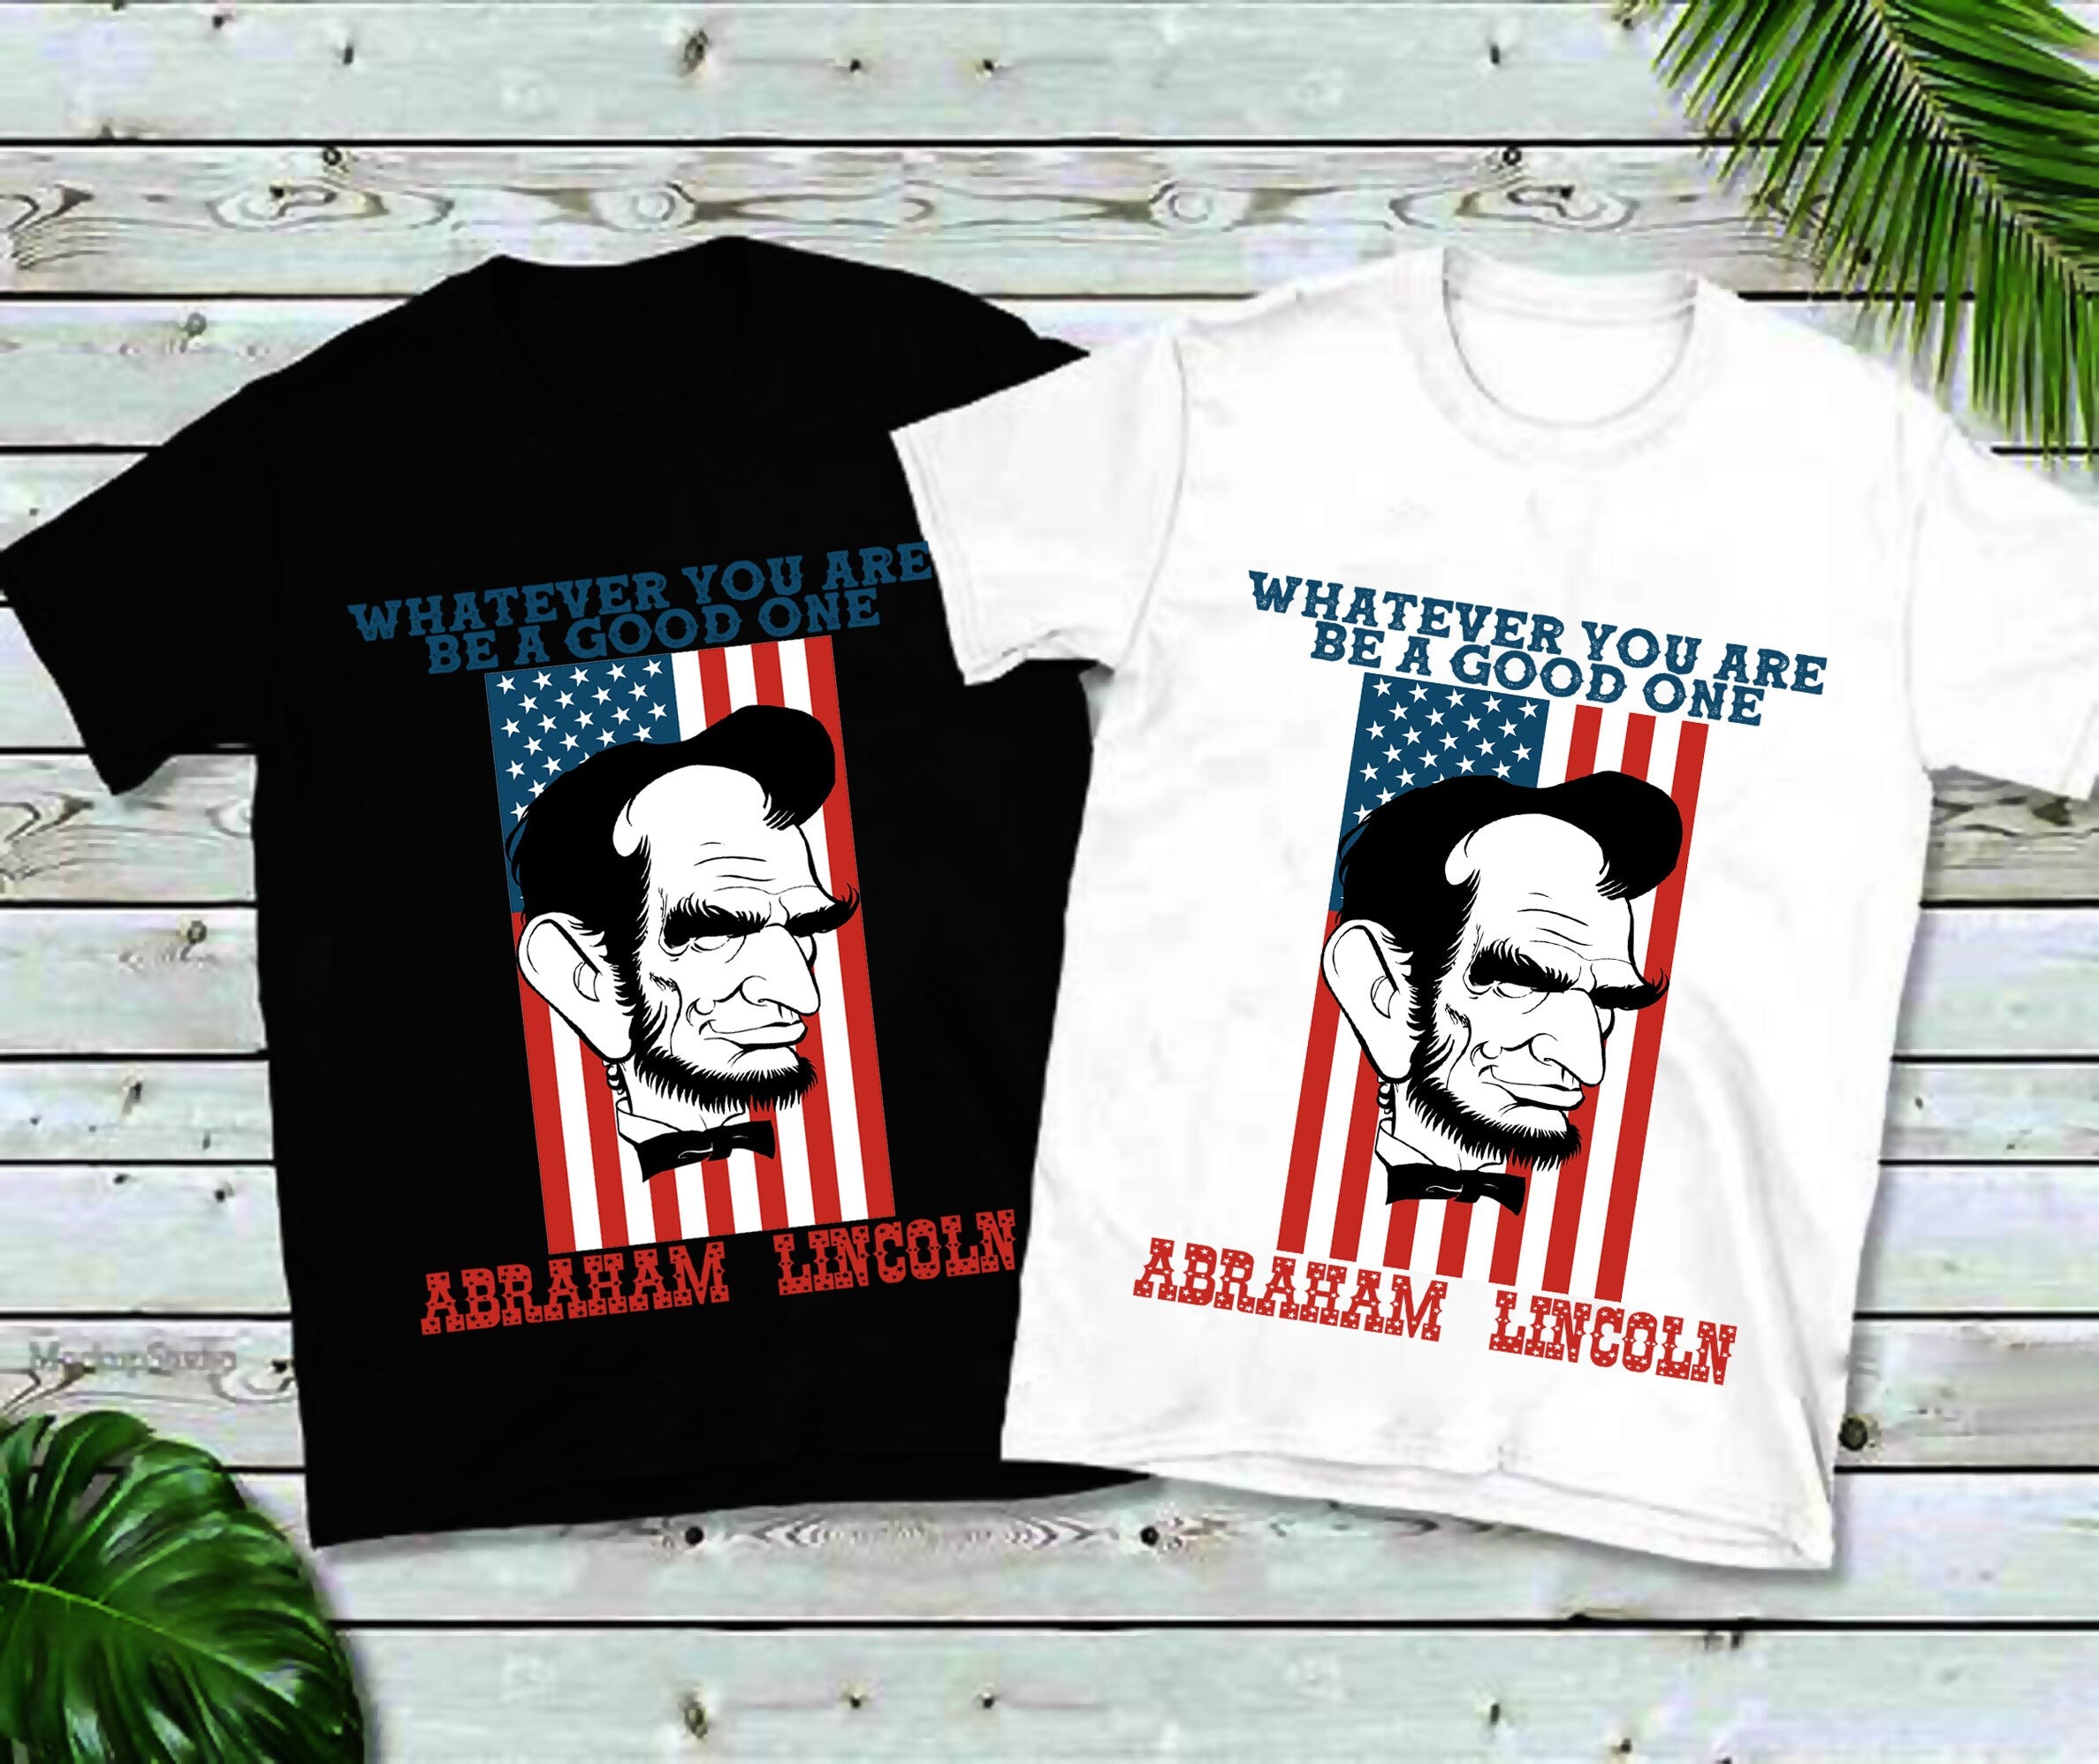 Whatever You Are Be A Good One, Abraham Lincoln T-Shirts, America Shirt, America, 4th of July Tee, Unisex Sized, USA, Abe Lincoln, Patriotic - plusminusco.com